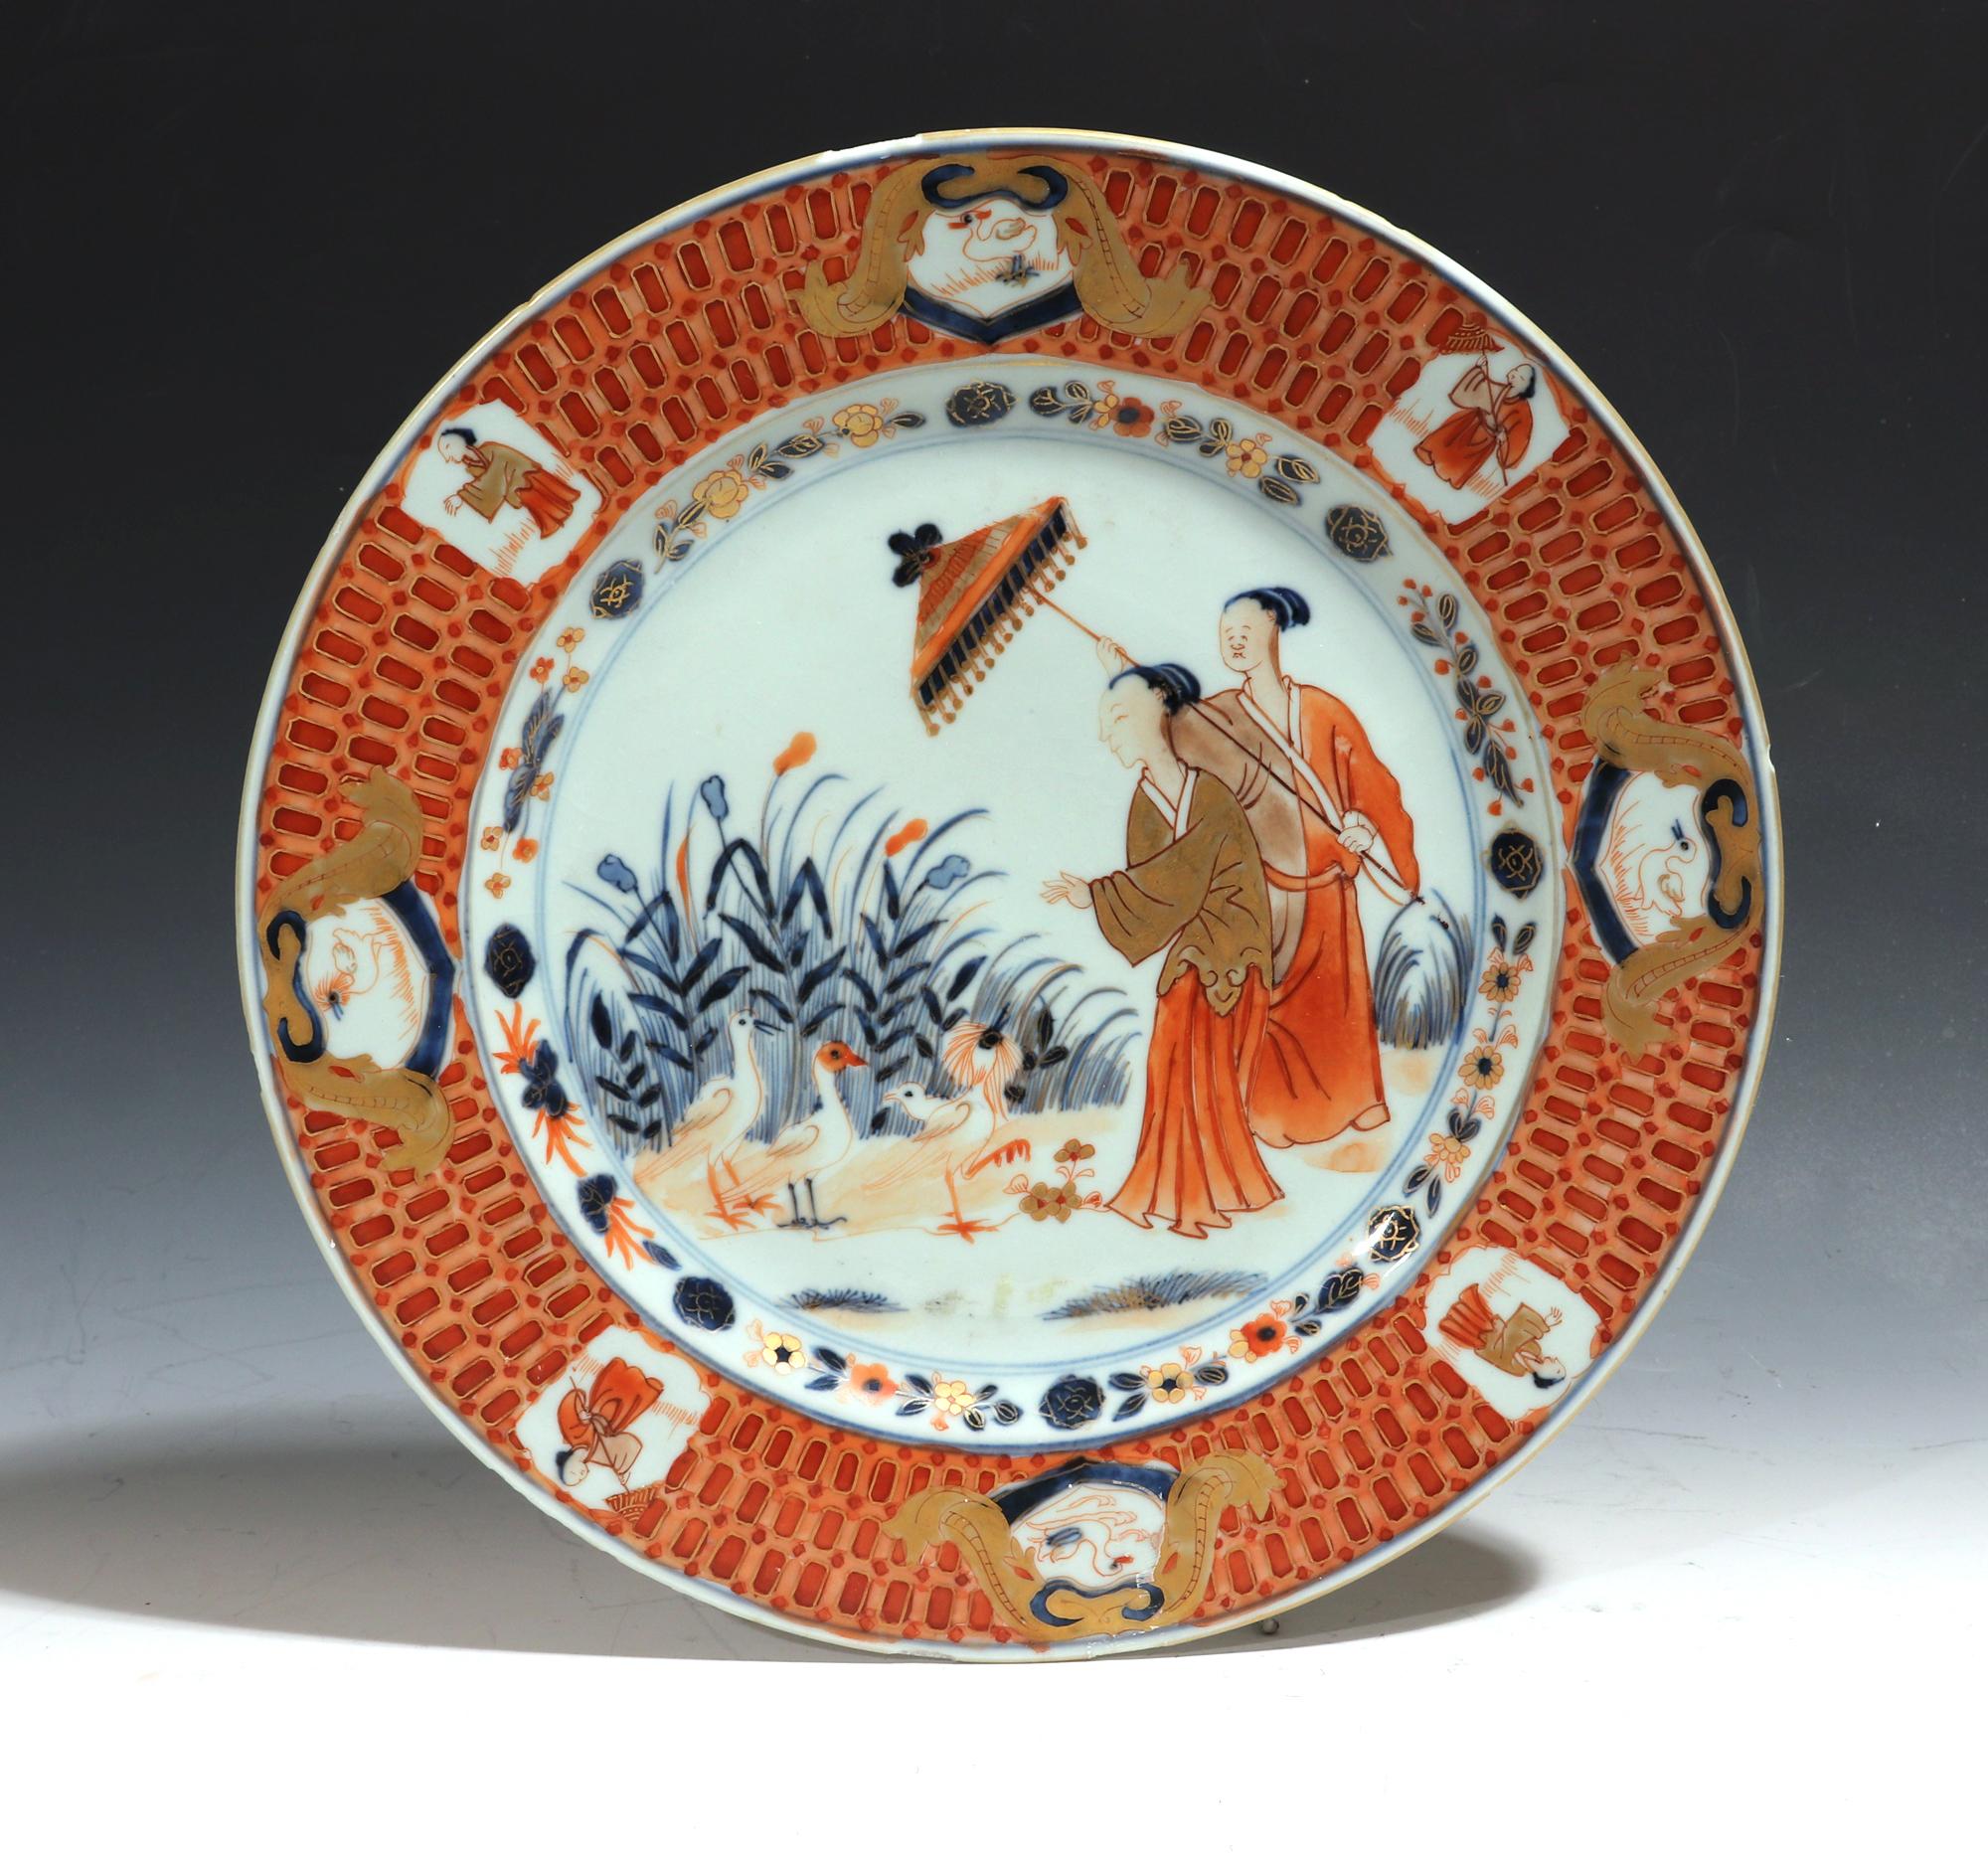 Chinese Export Porcelain Pronk La Dame au Parasol Plate
Circa 1740

This Chinese Export Porcelain Plate, Circa 1740, is decorated after a design by Cornelis Pronk, depicting an Oriental lady and her parasol-bearing attendant watching three colorful